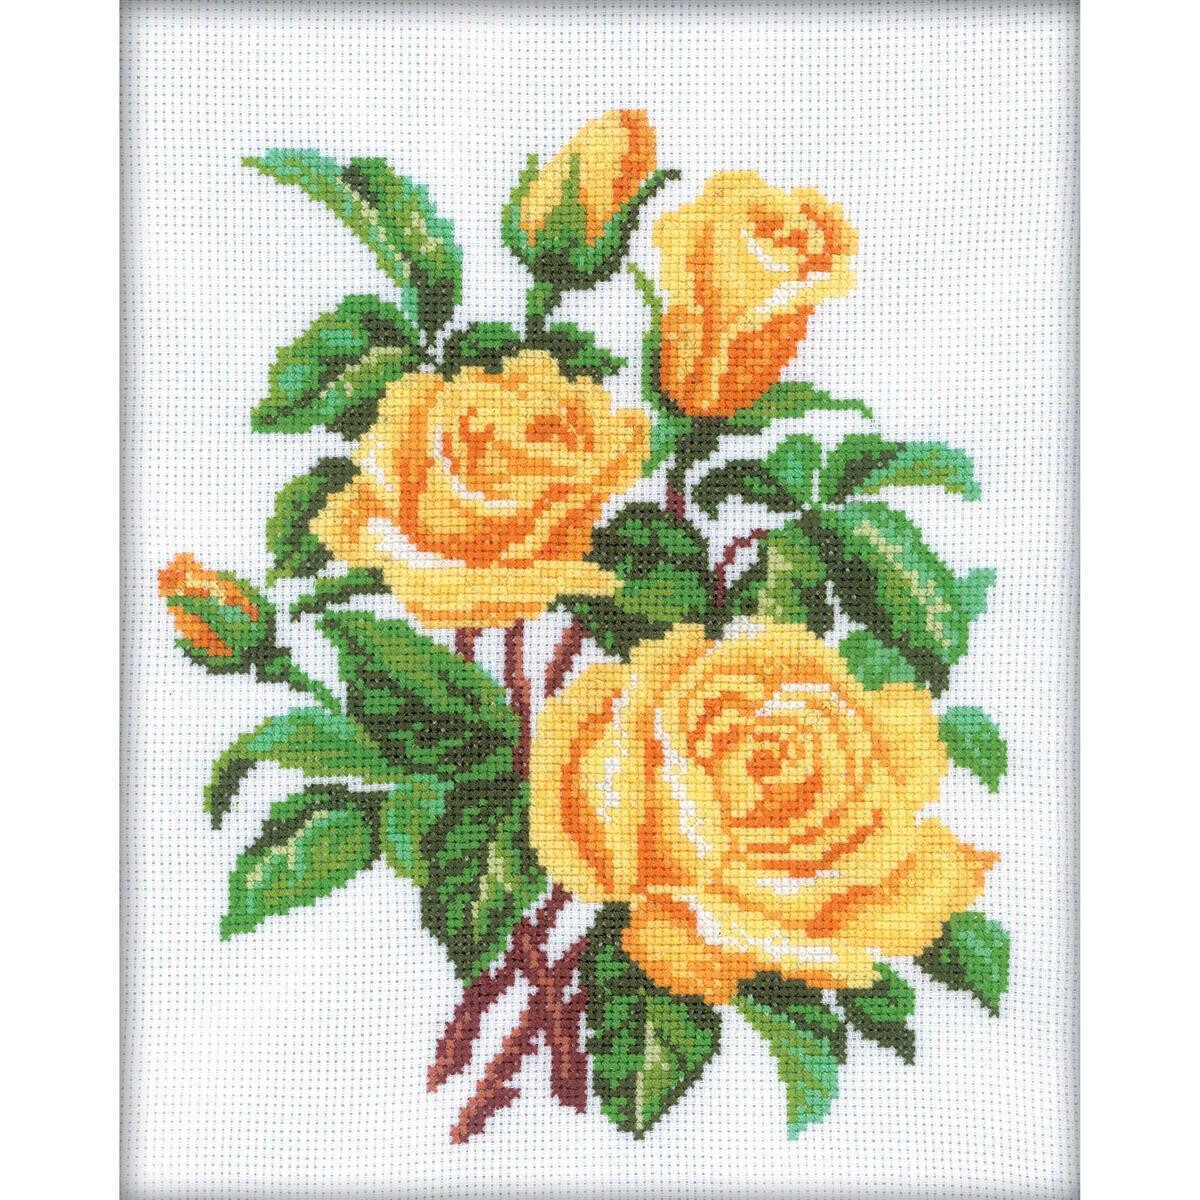 RTO counted Cross Stitch Kit "Yellow Roses"...